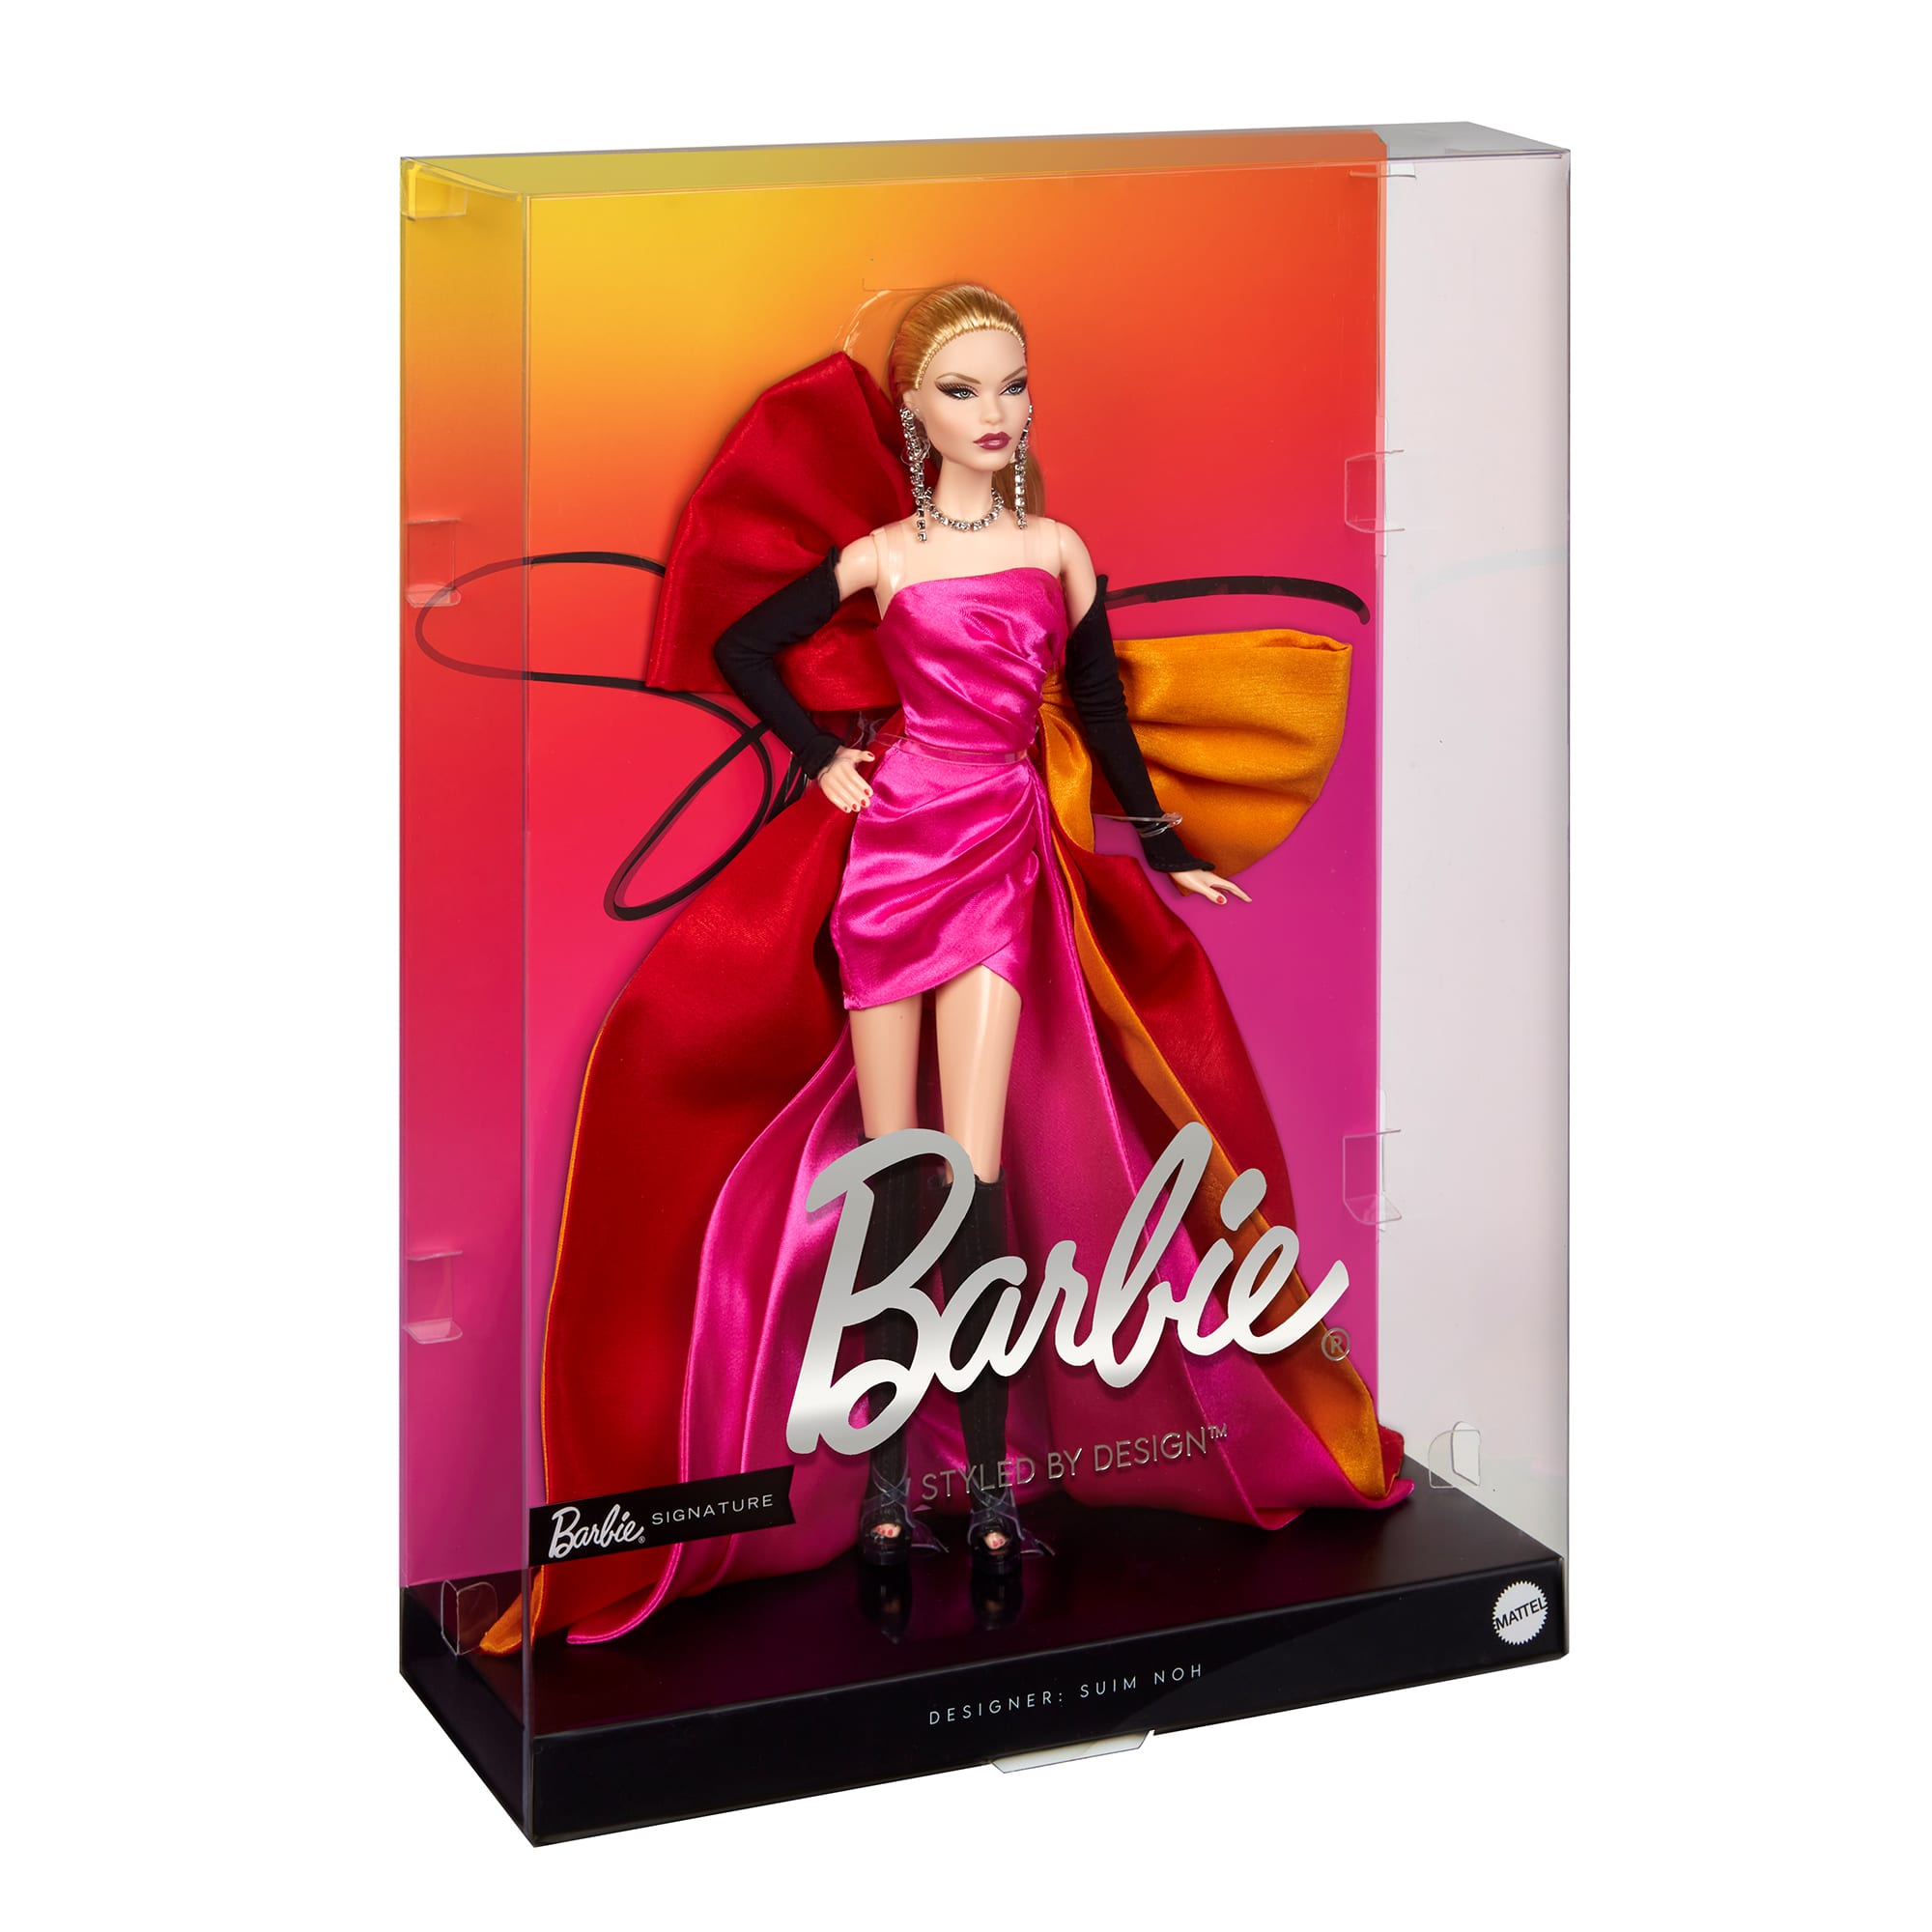 Barbie Styled by Design Doll | Mattel Creations